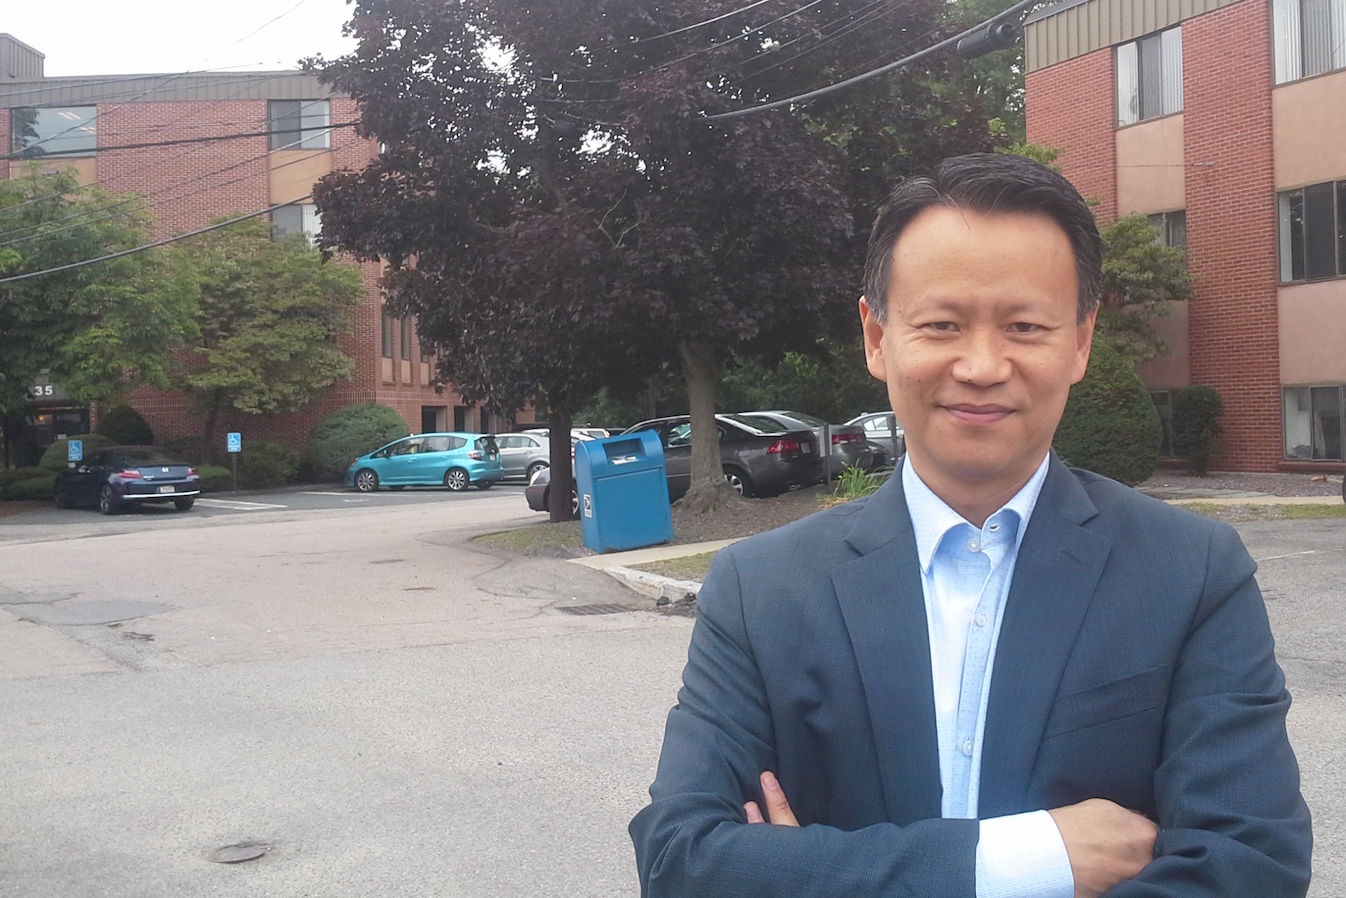 From Art Collecting to Allego: Meet the Busiest CEO in Boston Tech - Yuchun Lee